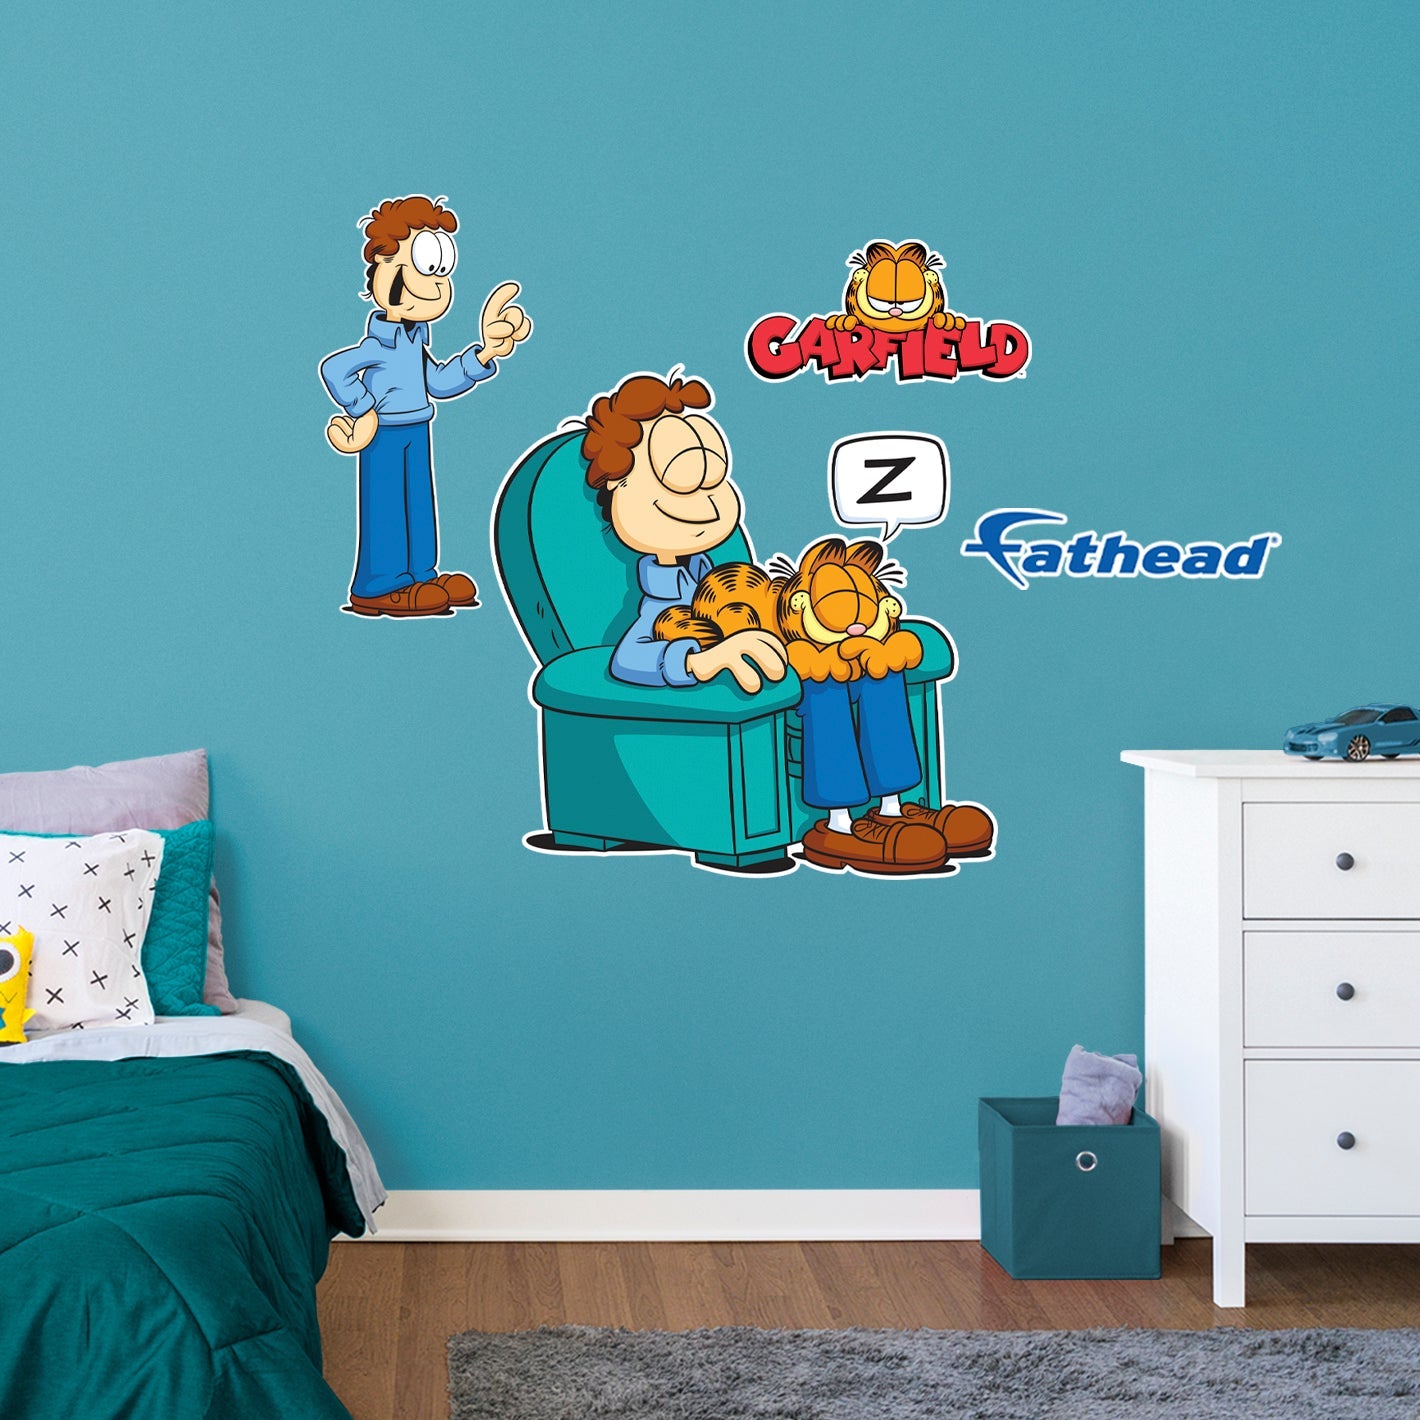 Garfield: Jon & Garfield RealBigs - Officially Licensed Nickelodeon Removable Adhesive Decal